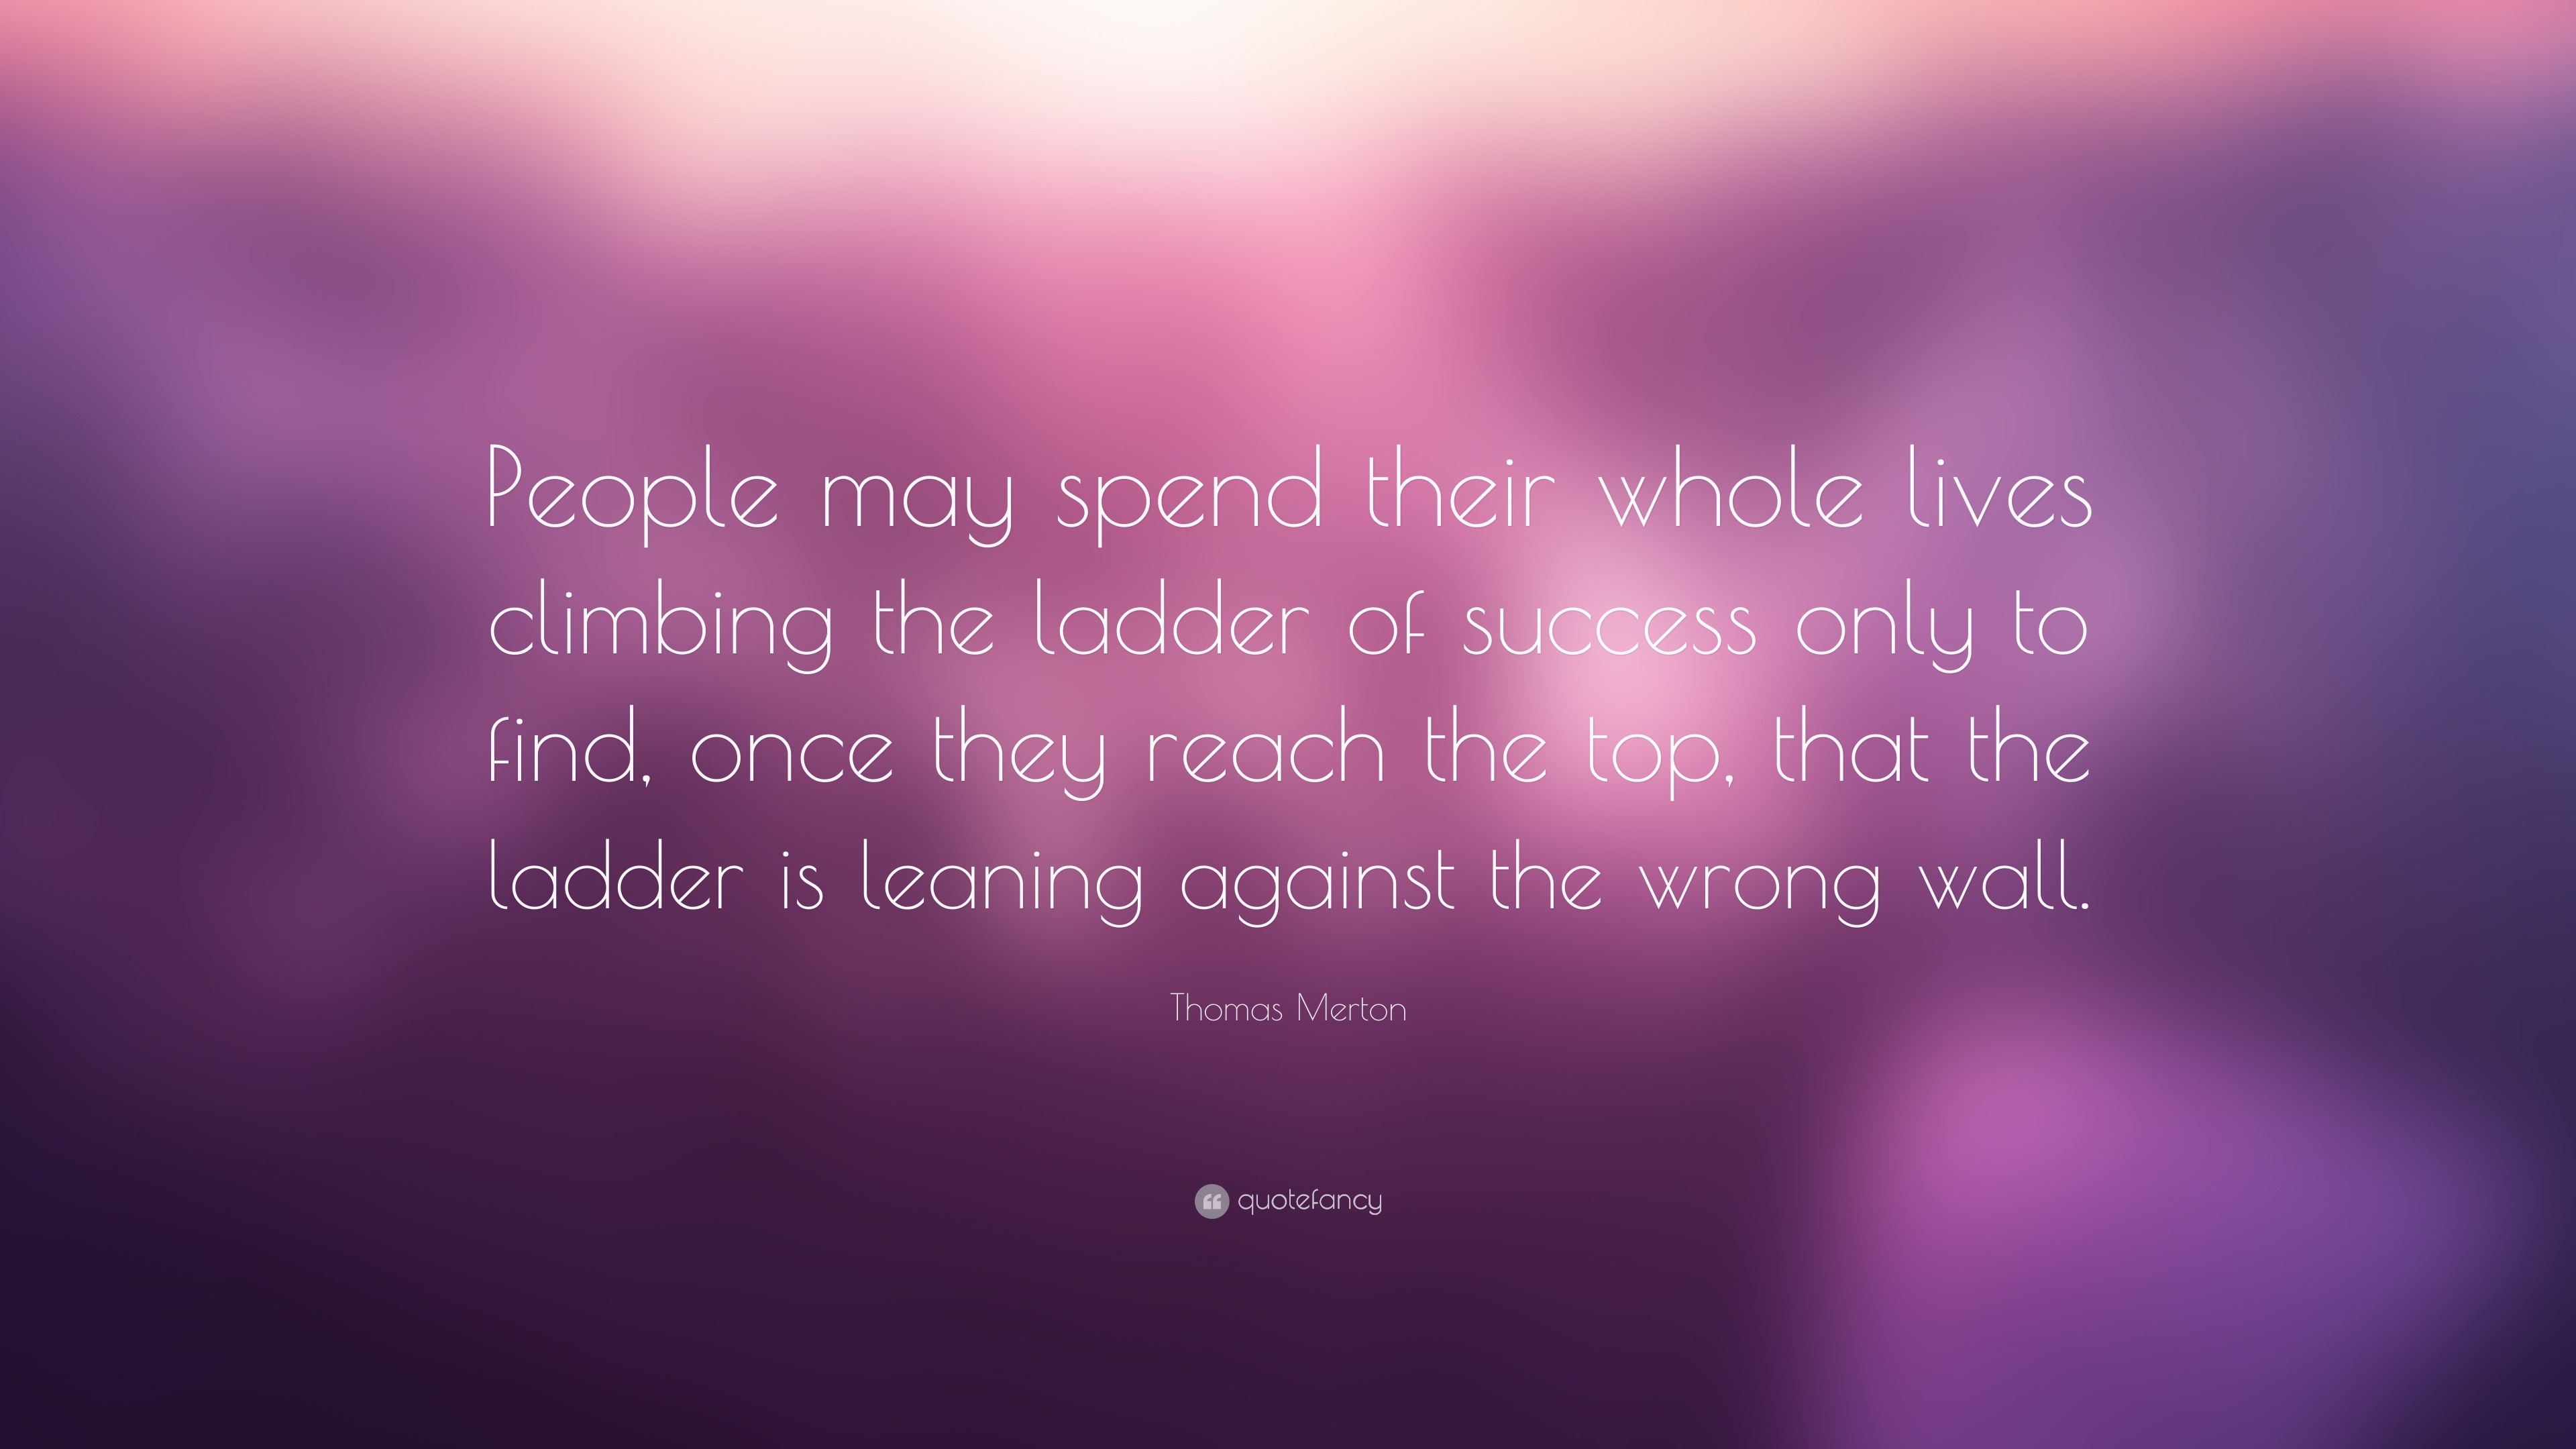 Thomas Merton Quote: “People may spend their whole lives climbing the